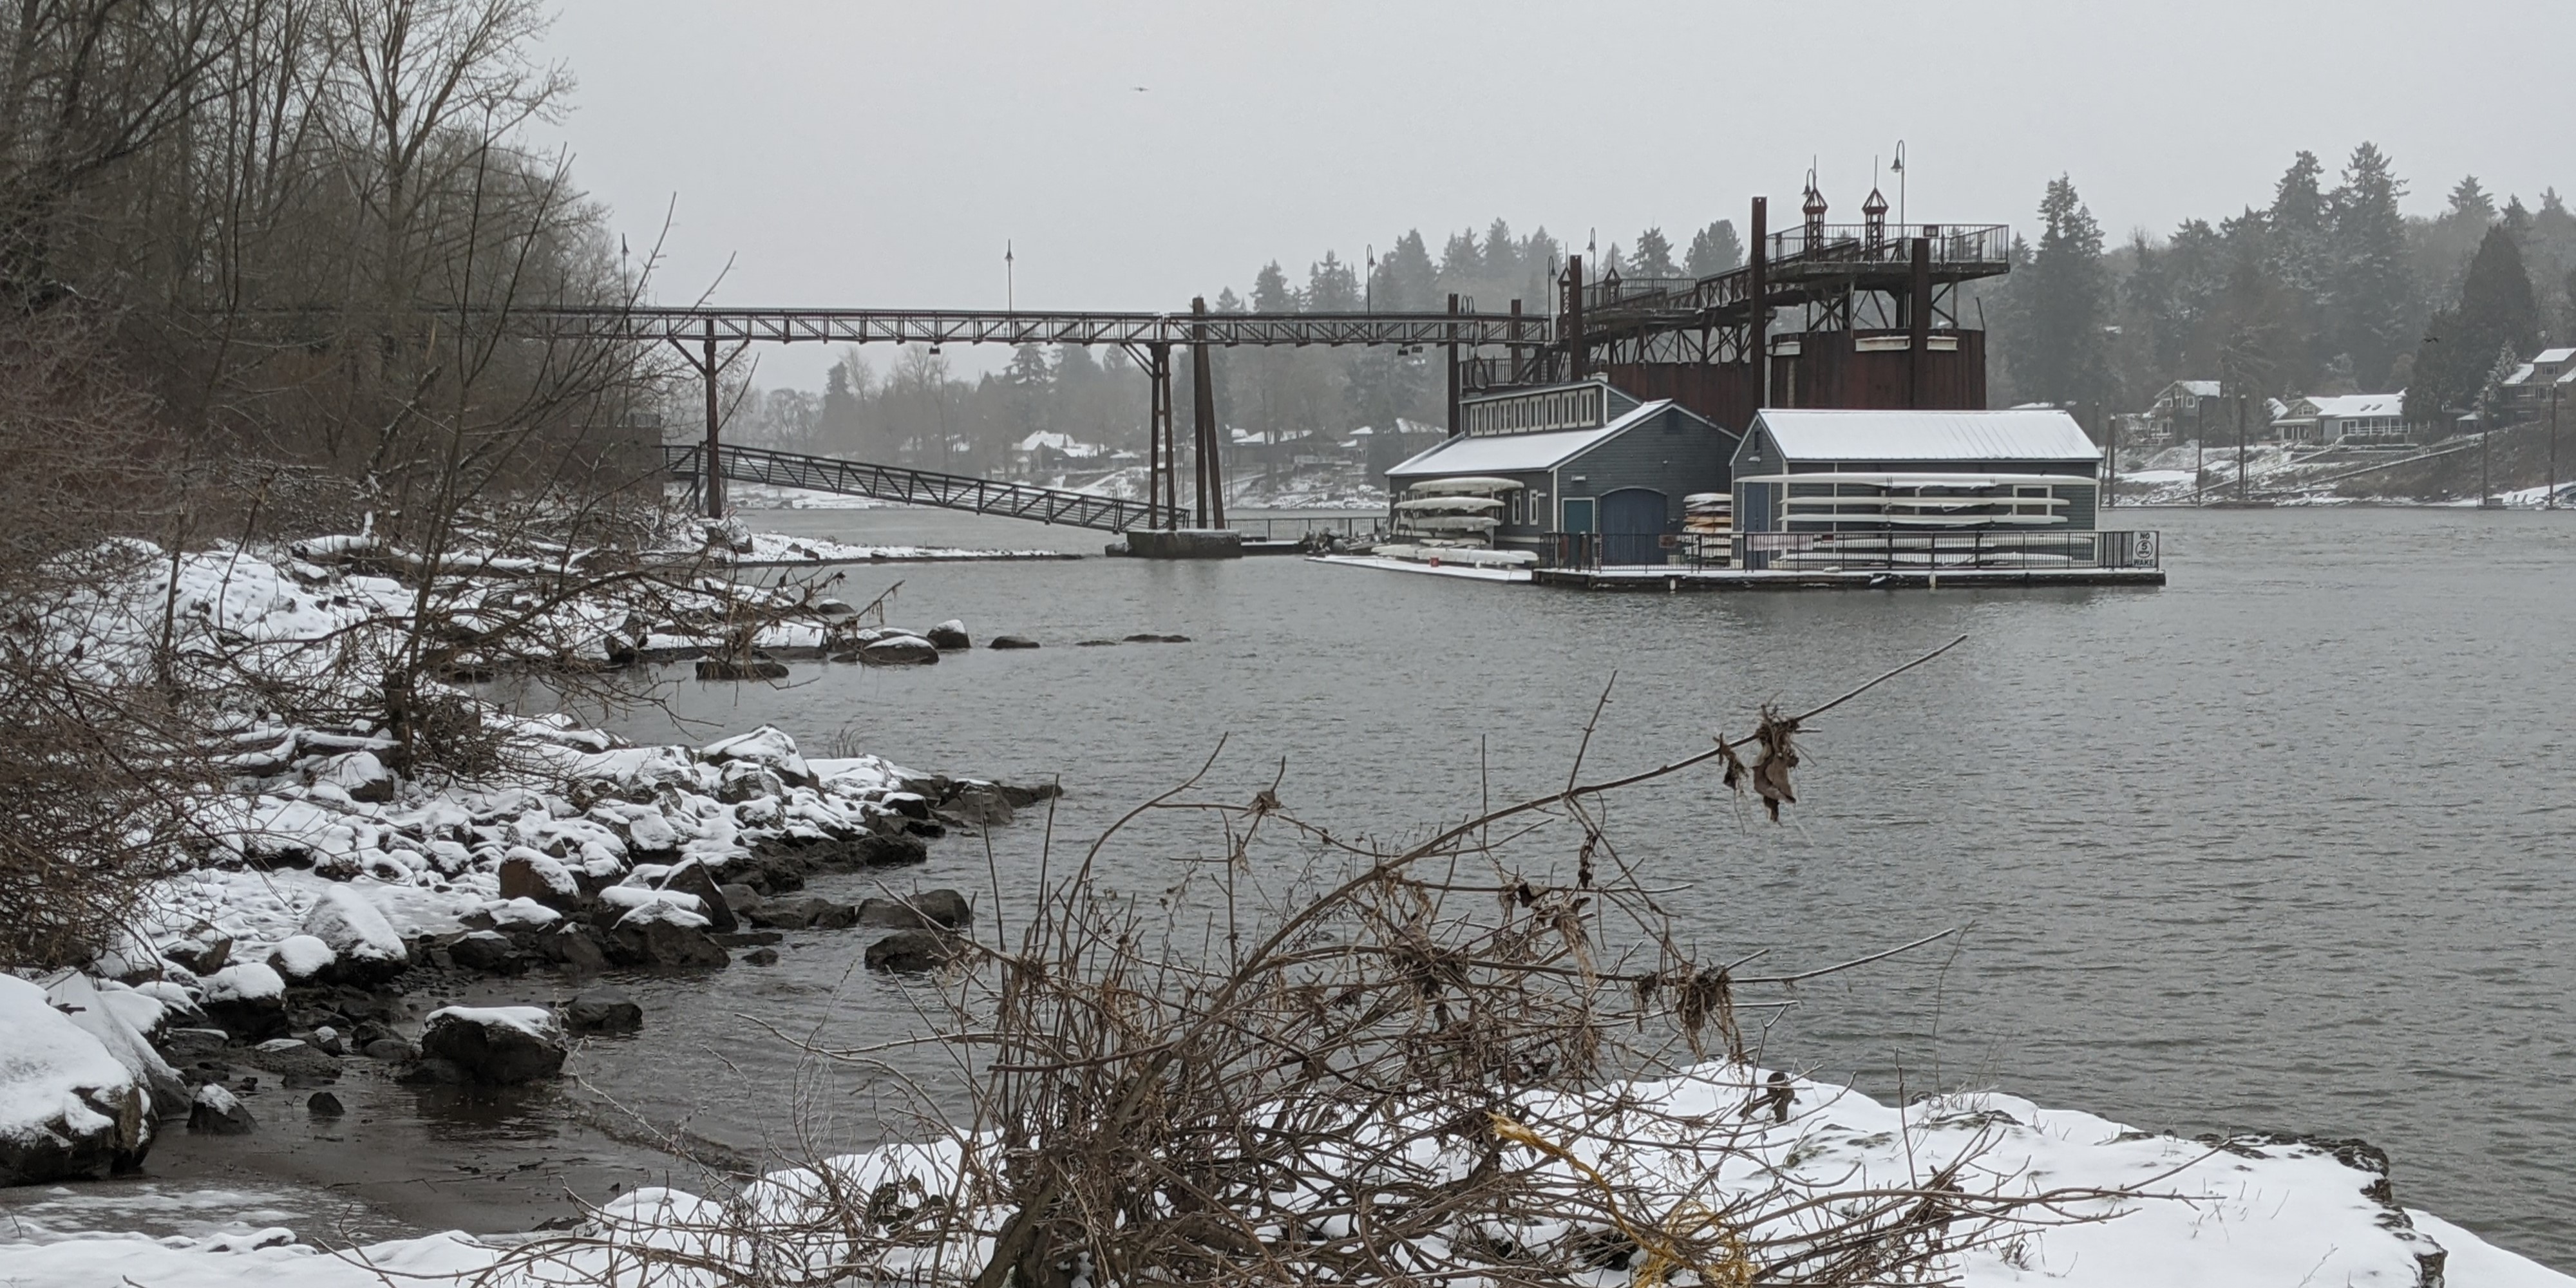 Snow on the Willamette River